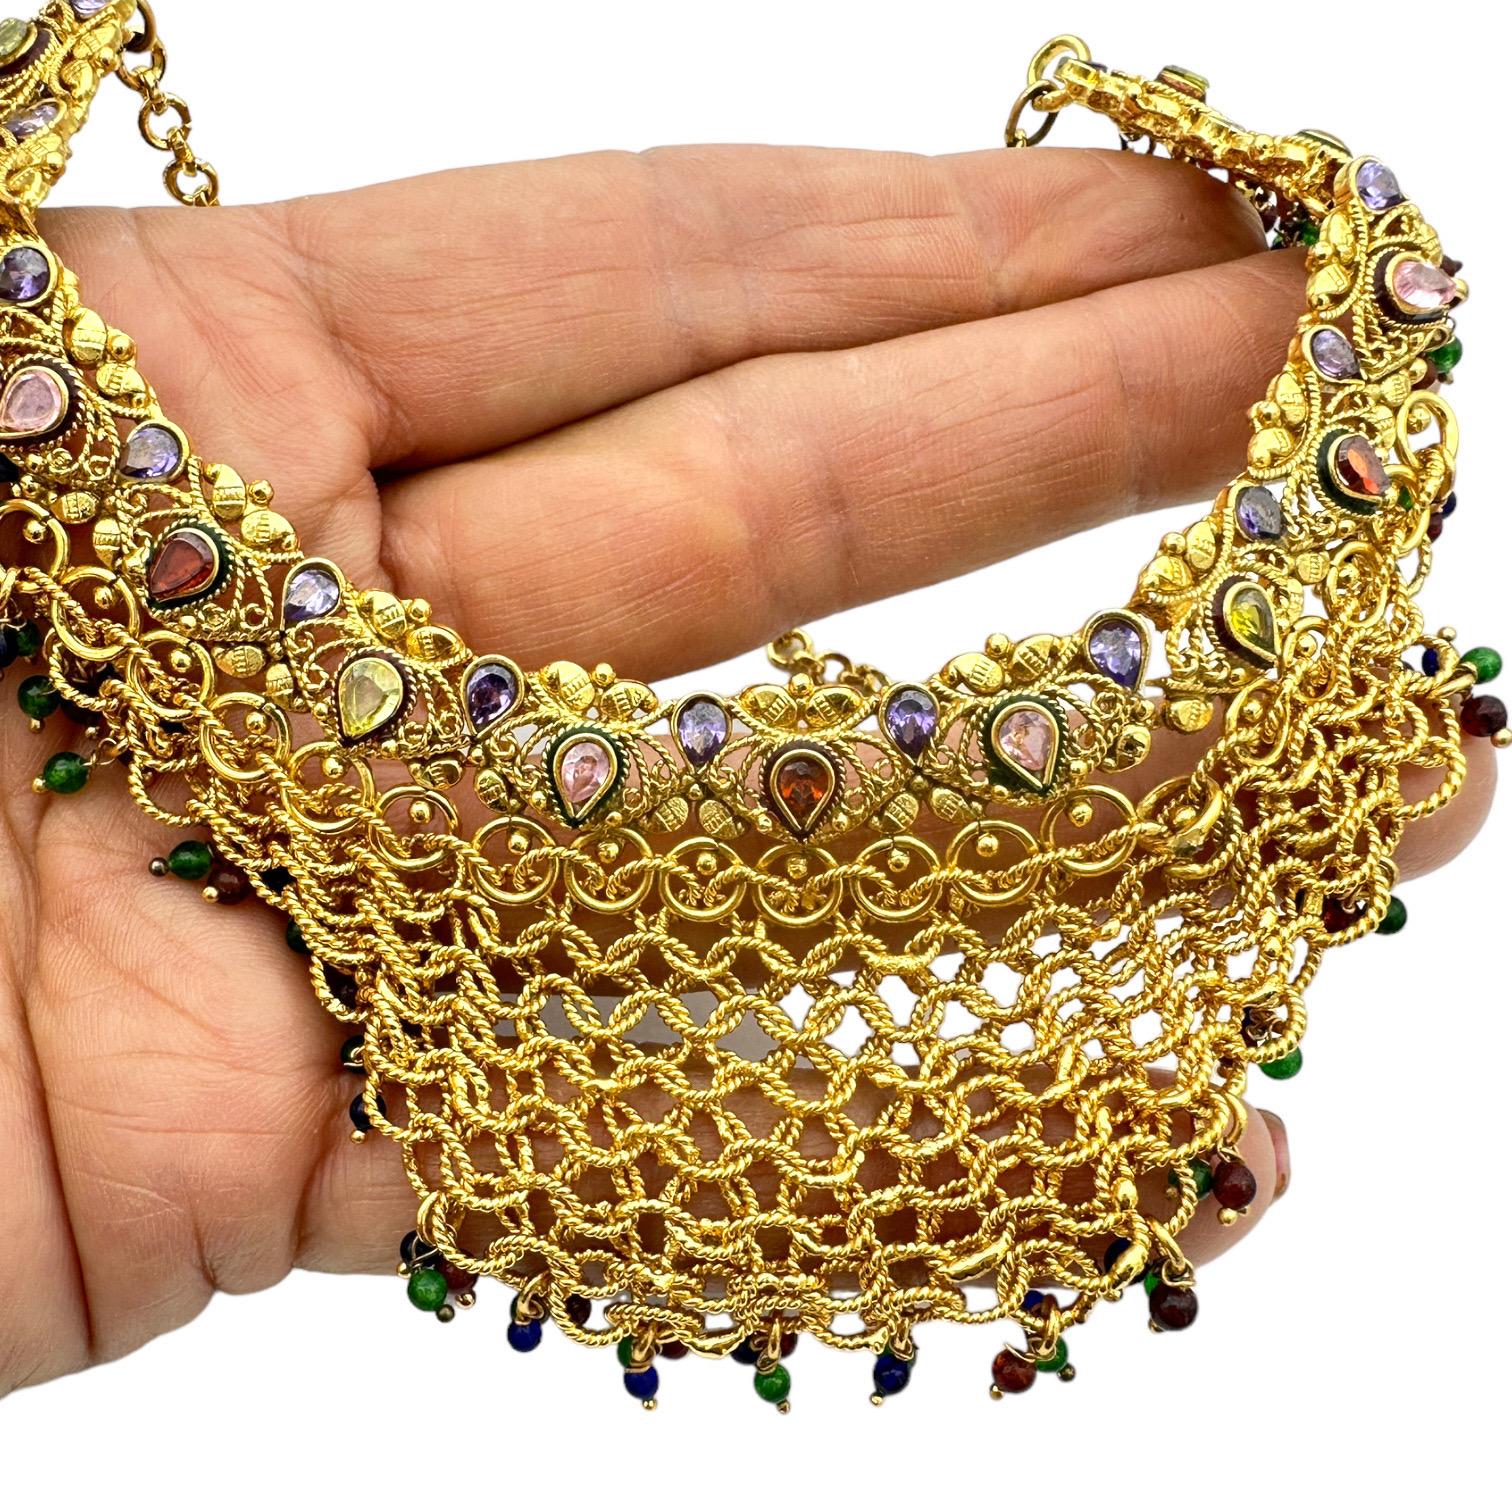 Egyptian Revival Egyptian Mesh, Jeweled Gem Colored Necklace 24K Electroplated For Sale